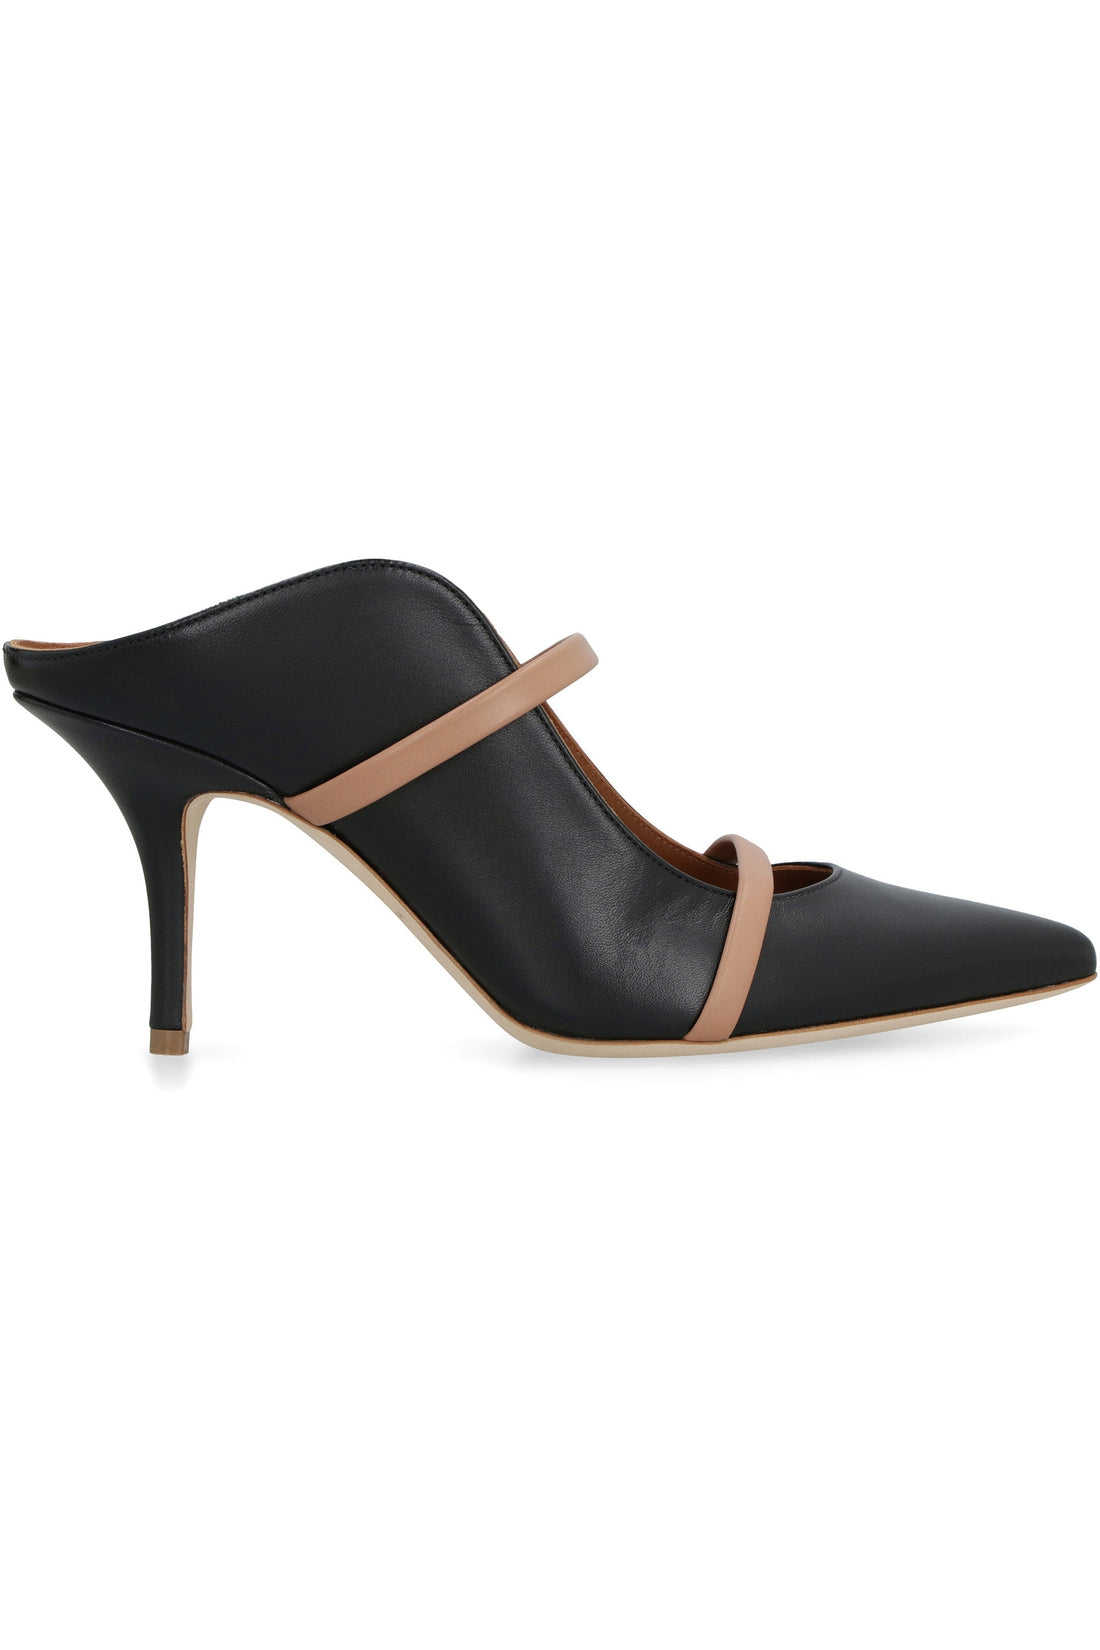 Malone Souliers-OUTLET-SALE-Maureen leather mules-ARCHIVIST